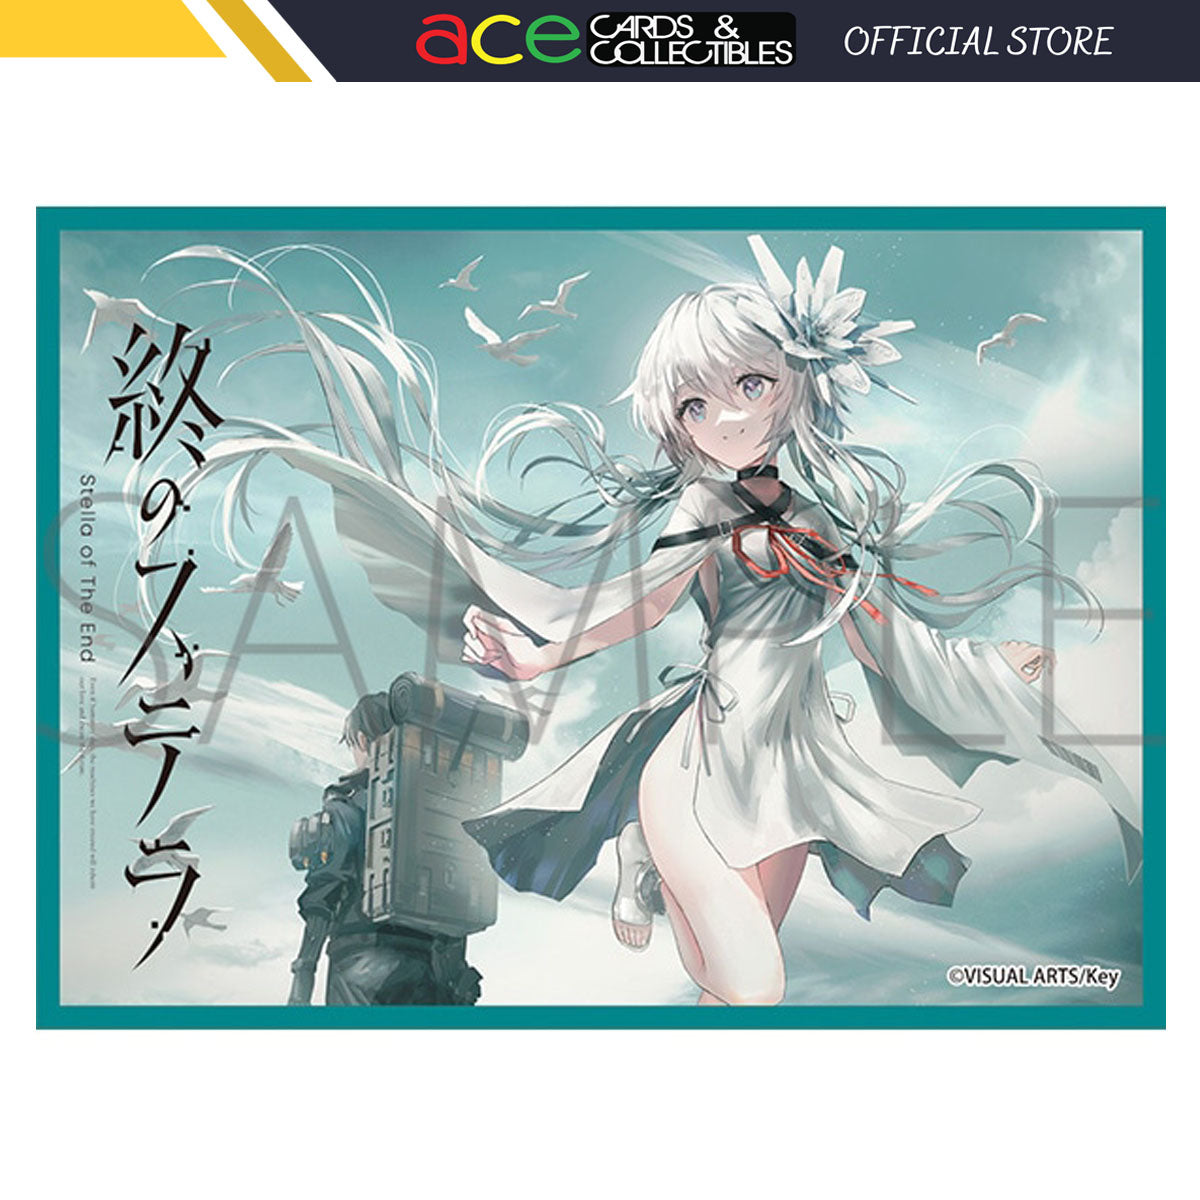 Stella of The End Character Sleeve Matte Collection [MT1347]-Movic-Ace Cards & Collectibles